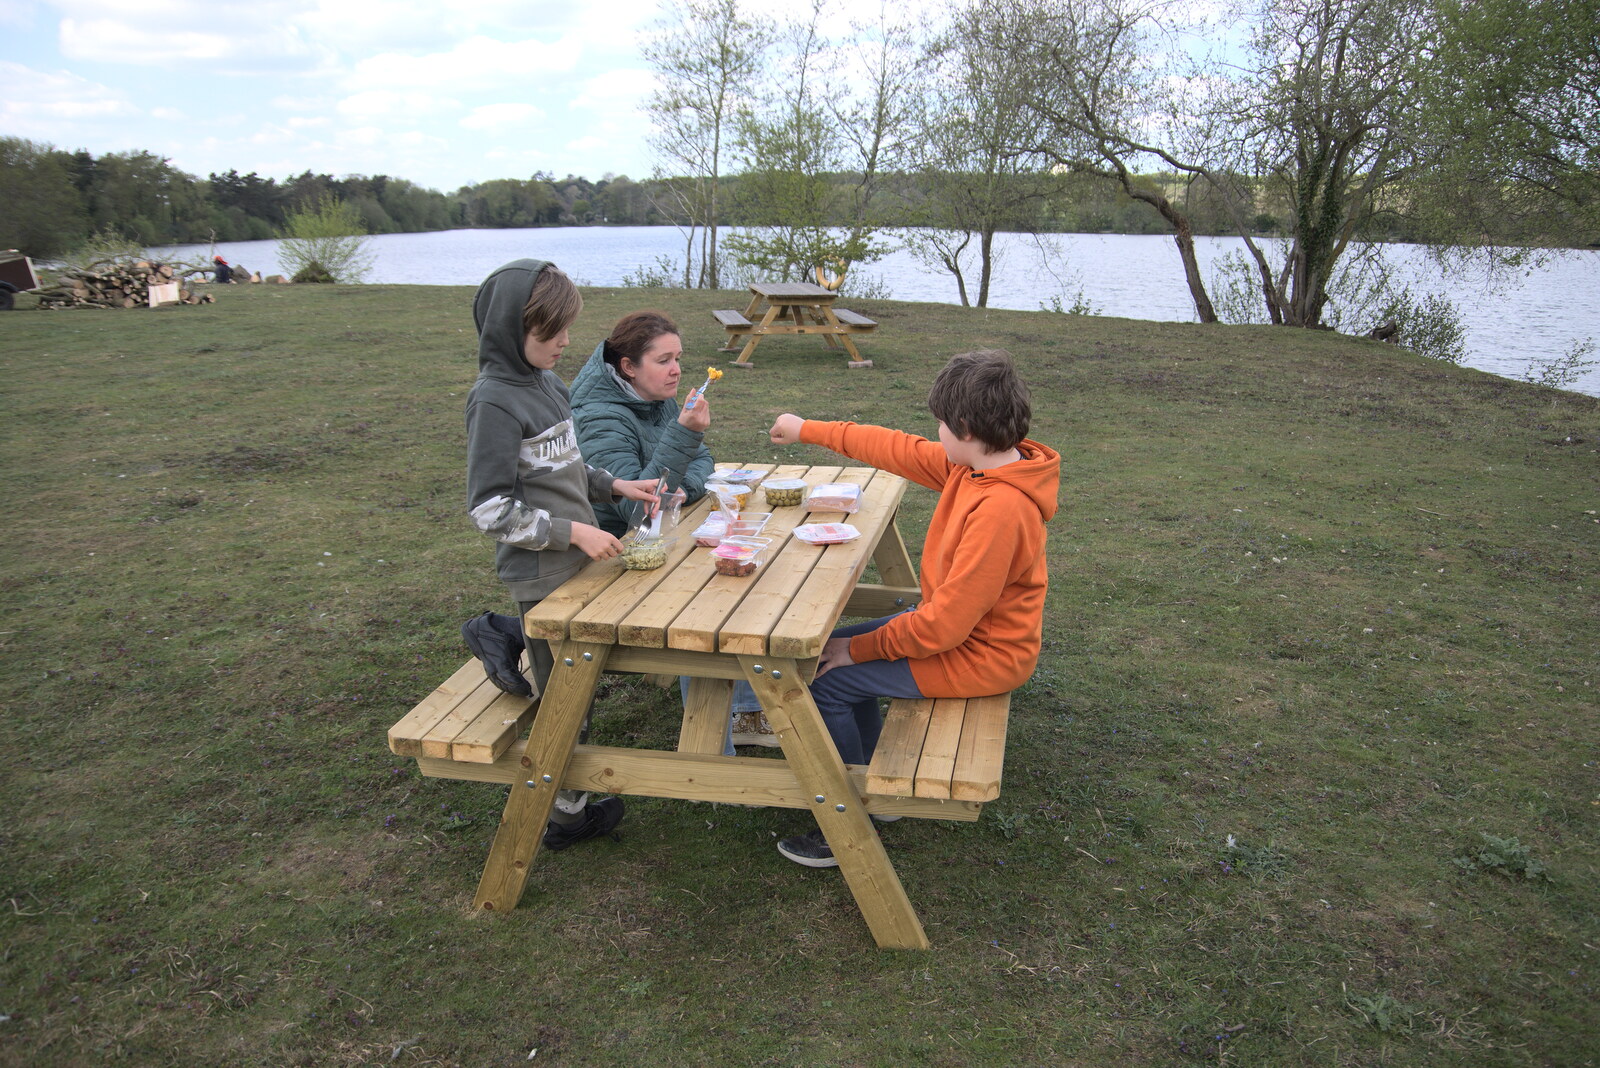 The Canoe's First Outing, Weybread Lake, Harleston - 1st May 2022: We have a quick picnic-bench snack